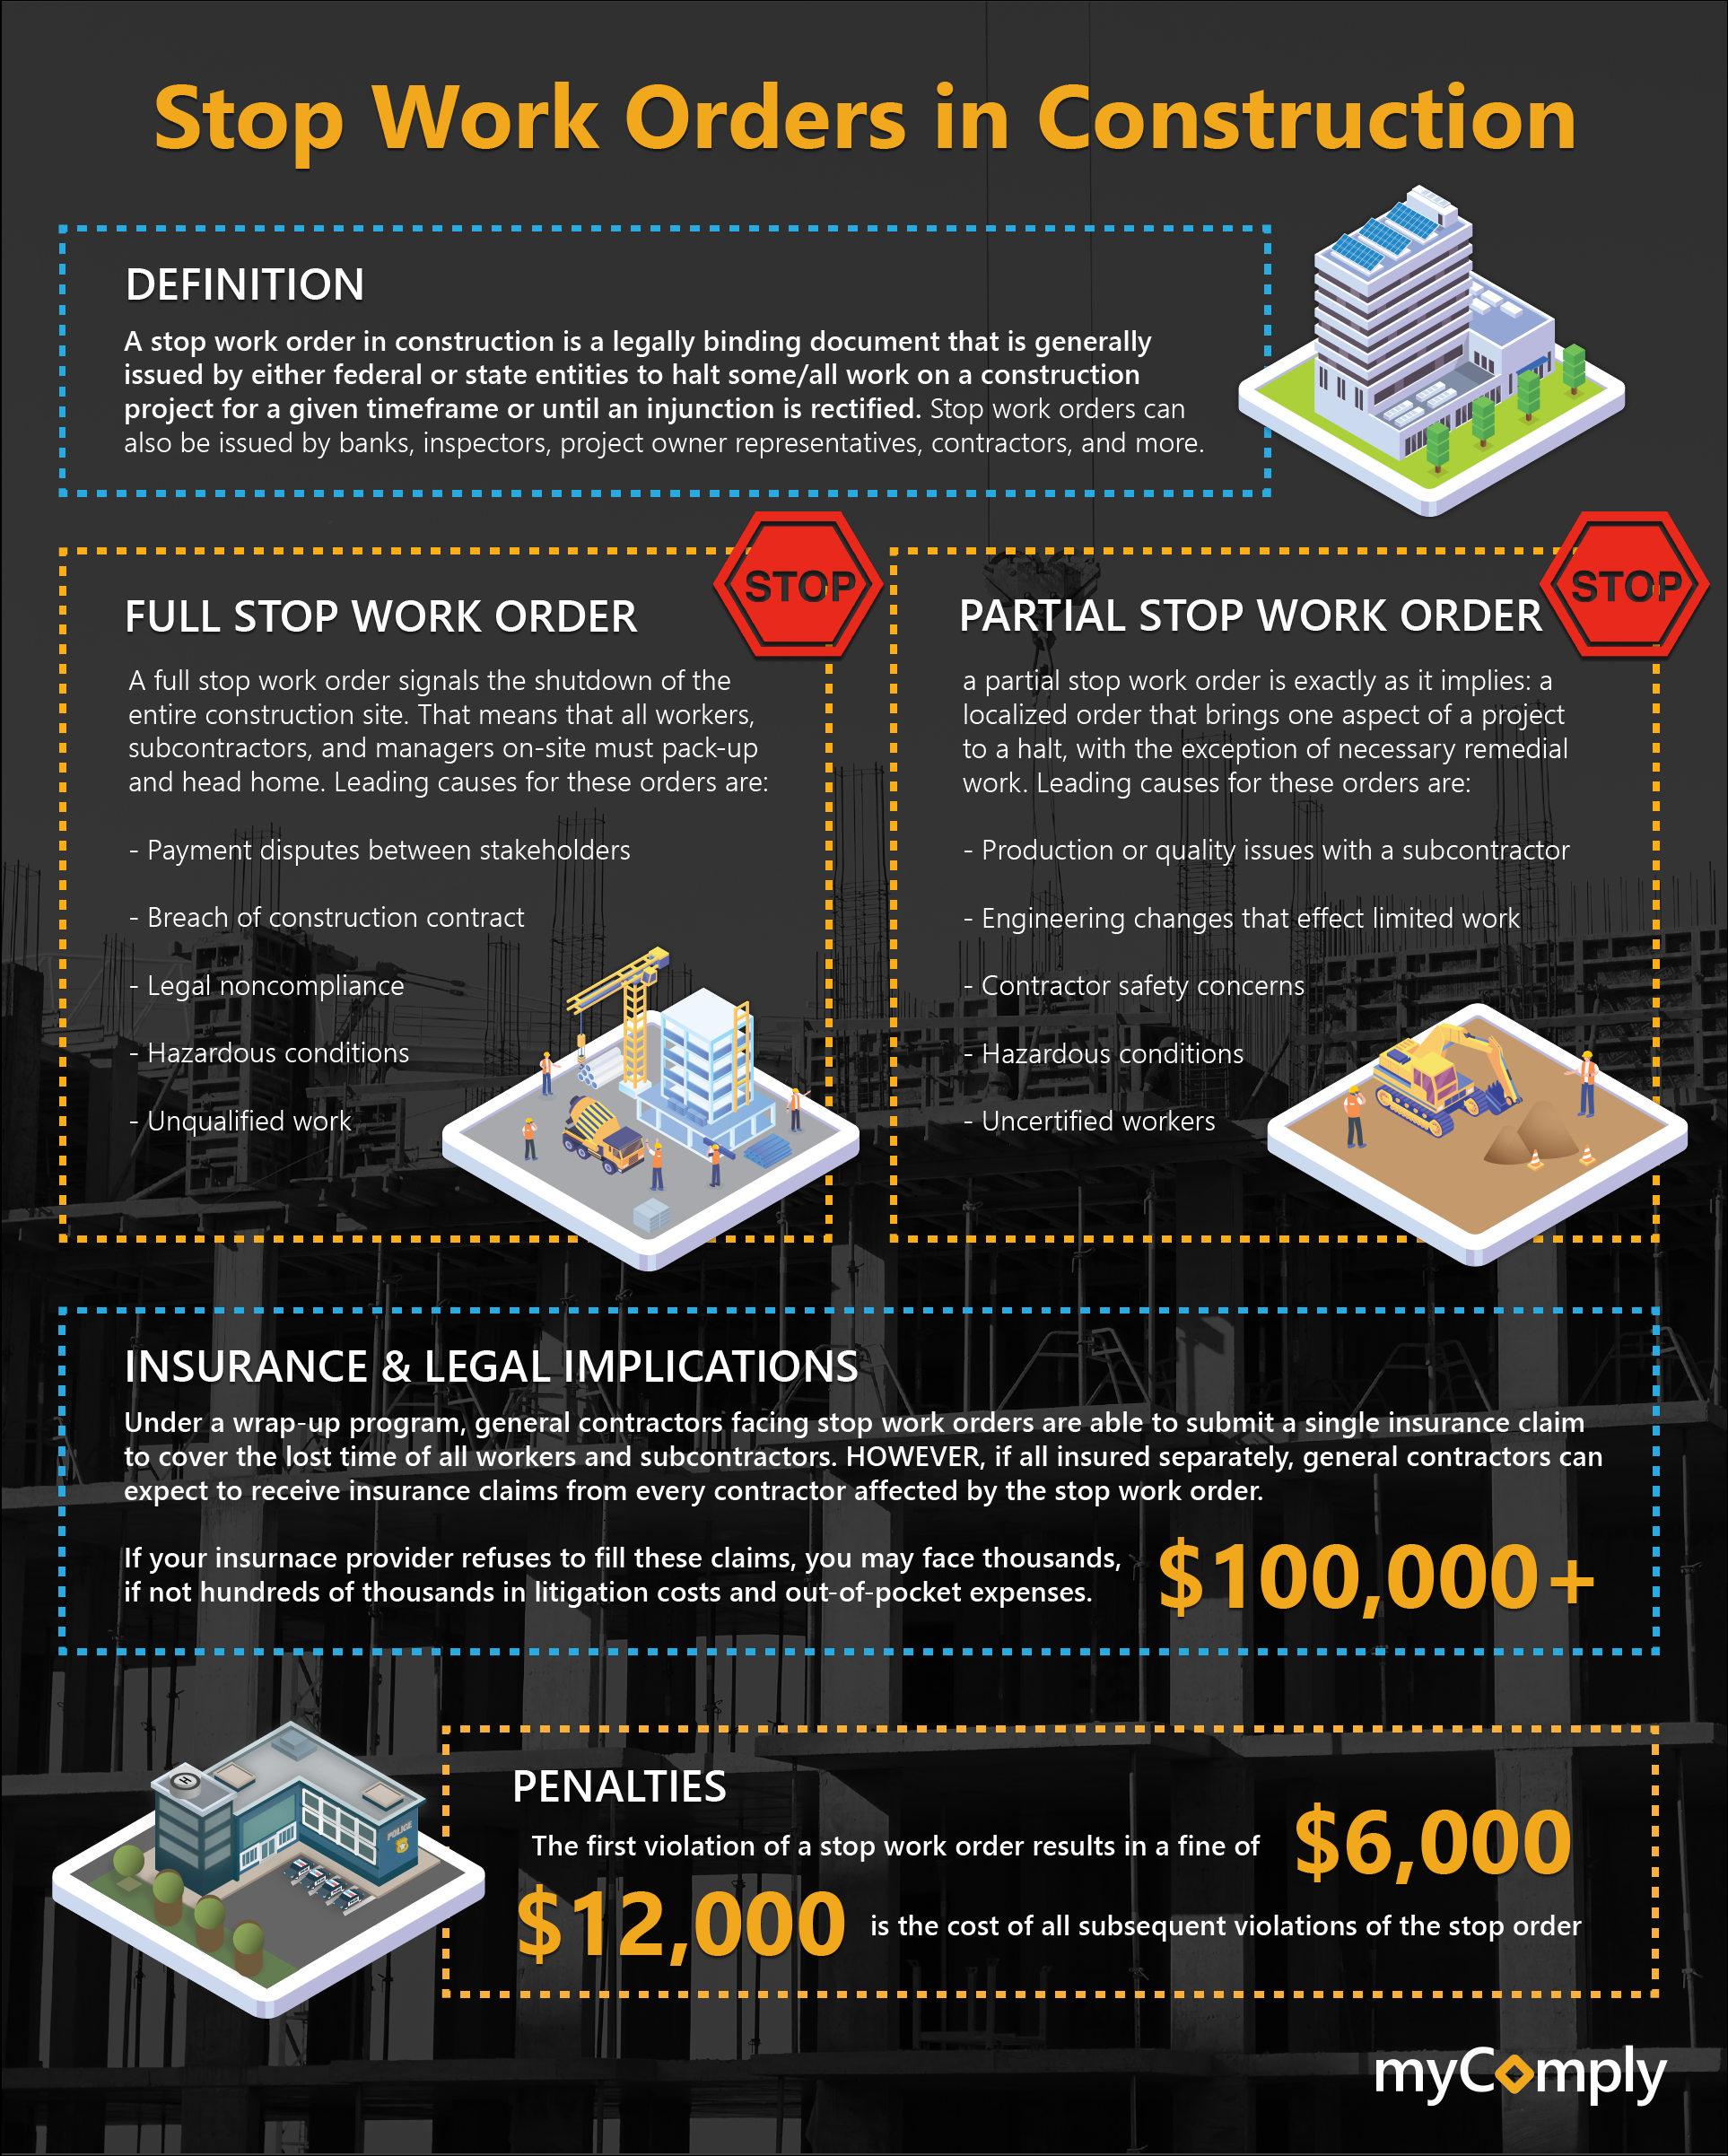 stop work orders in construction infographic